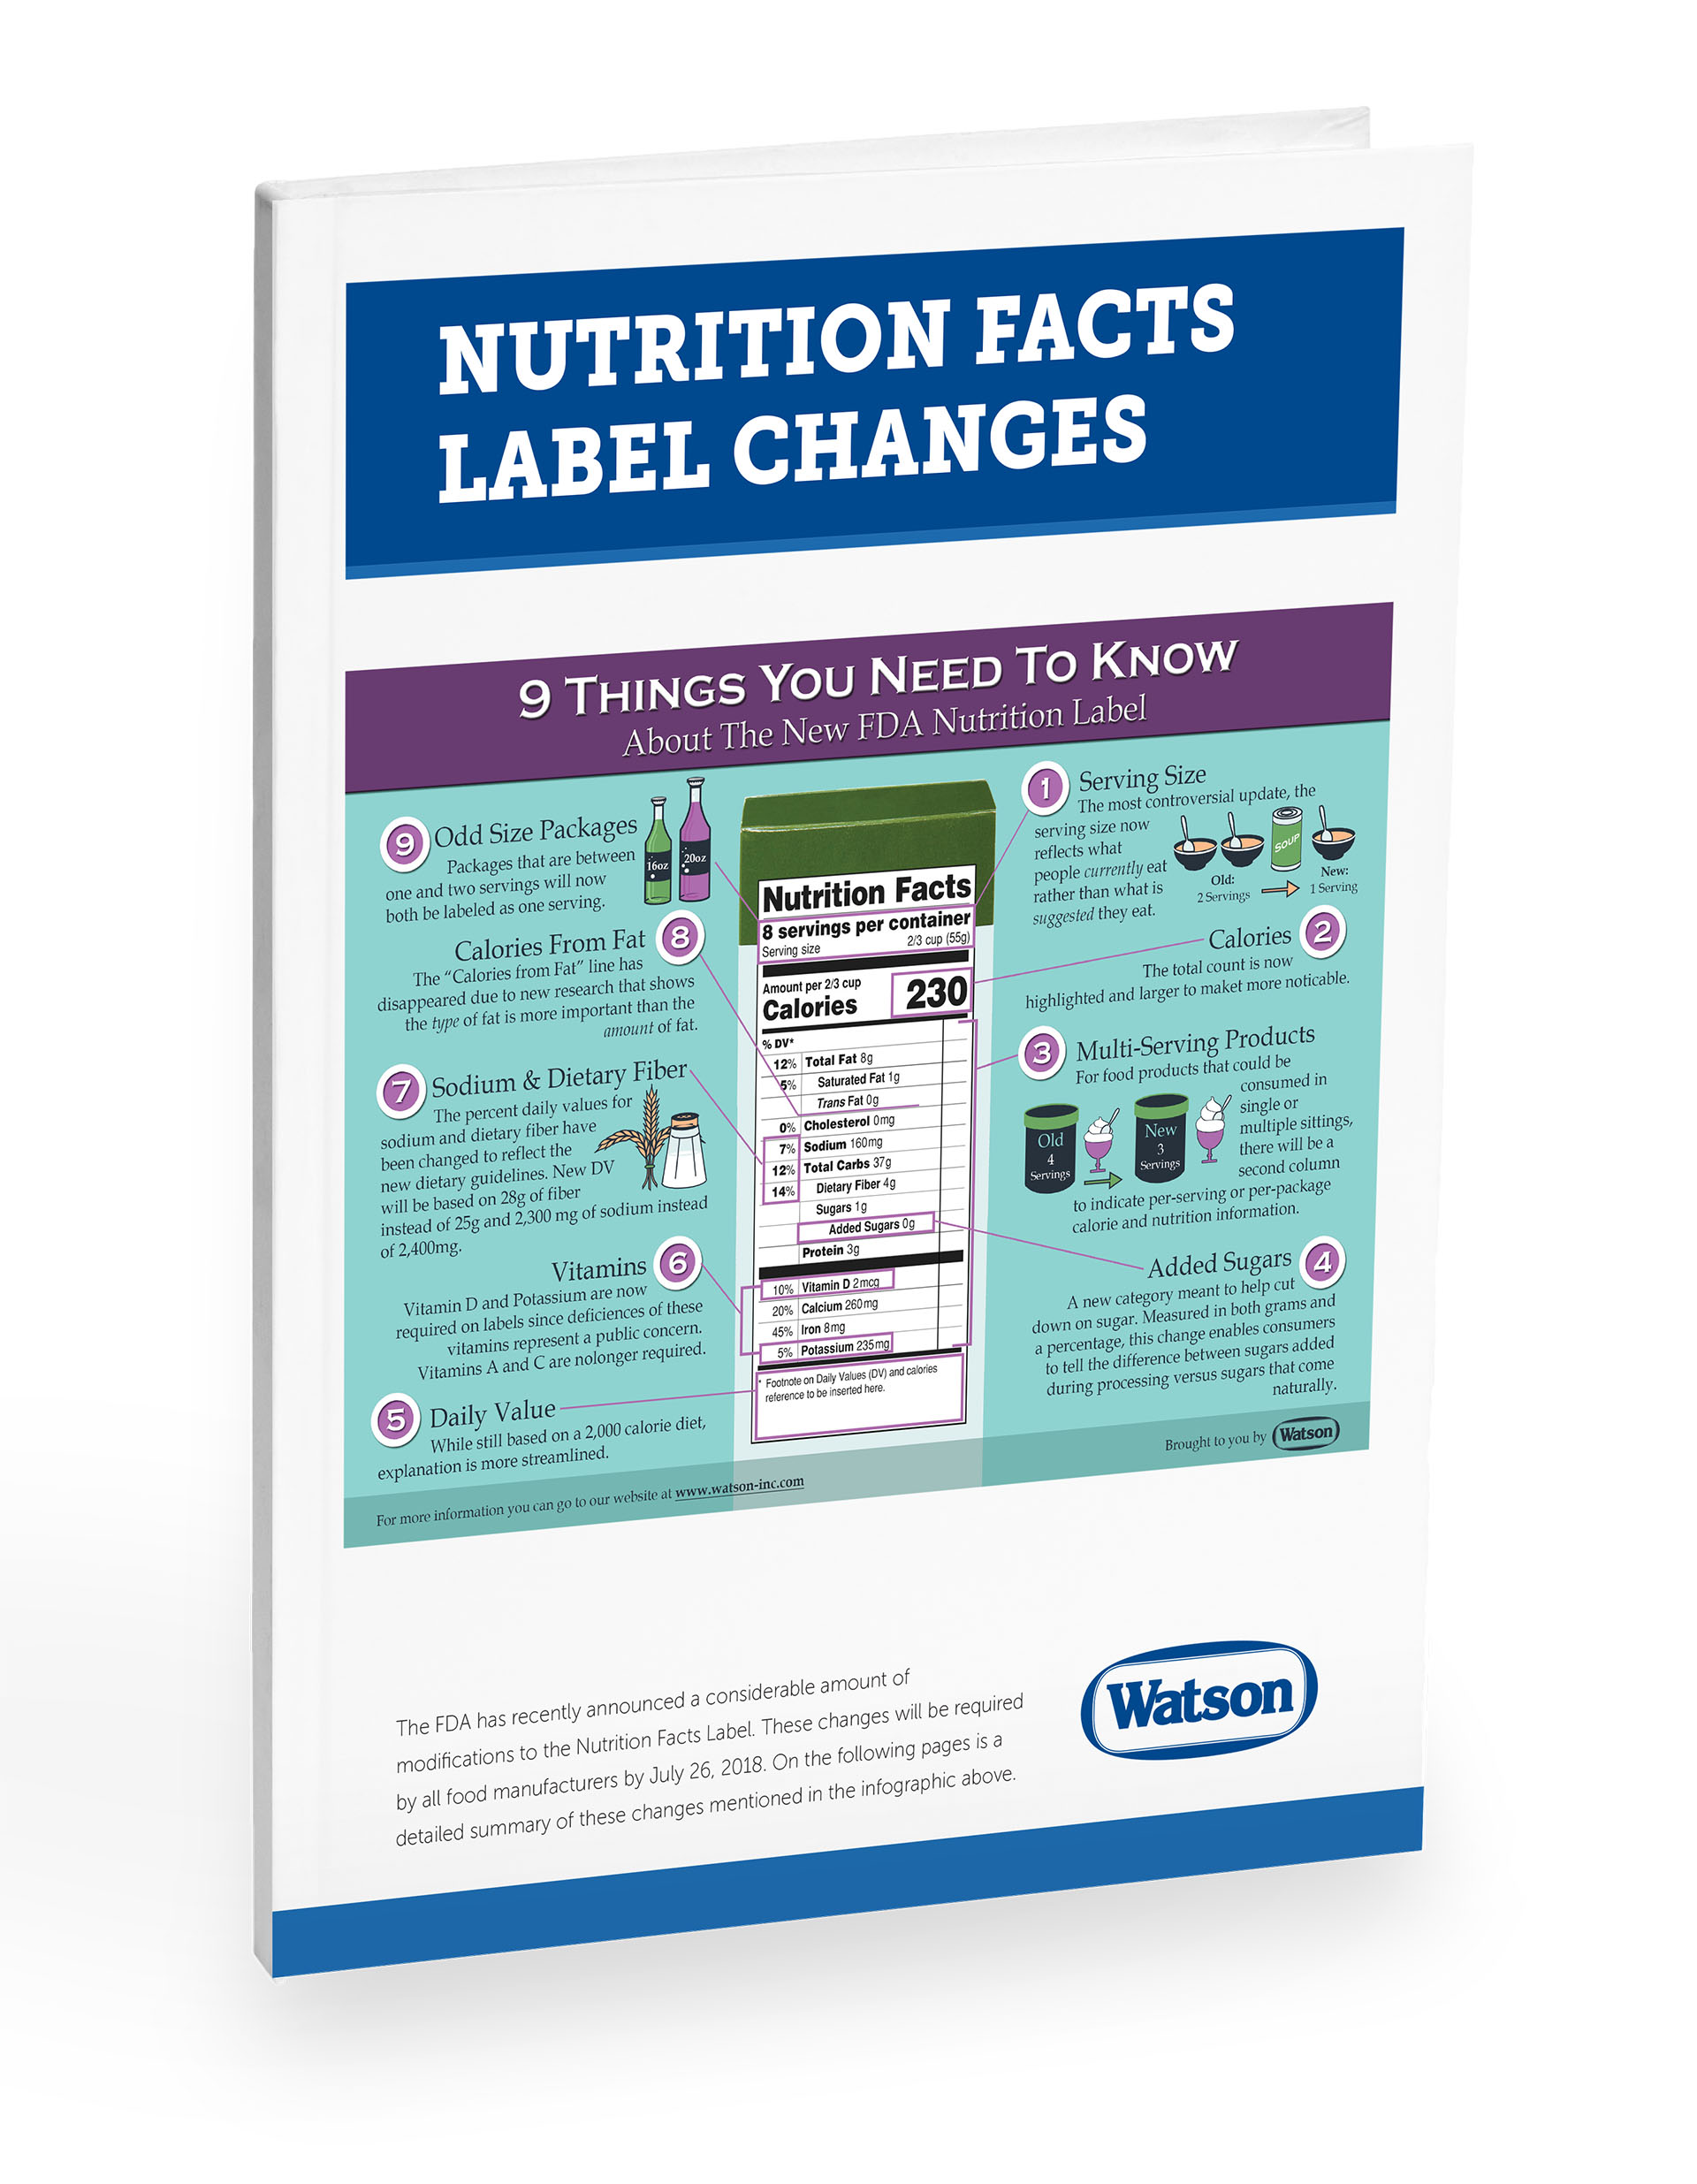 Nutrition Fact Label Changes Booklet Cover